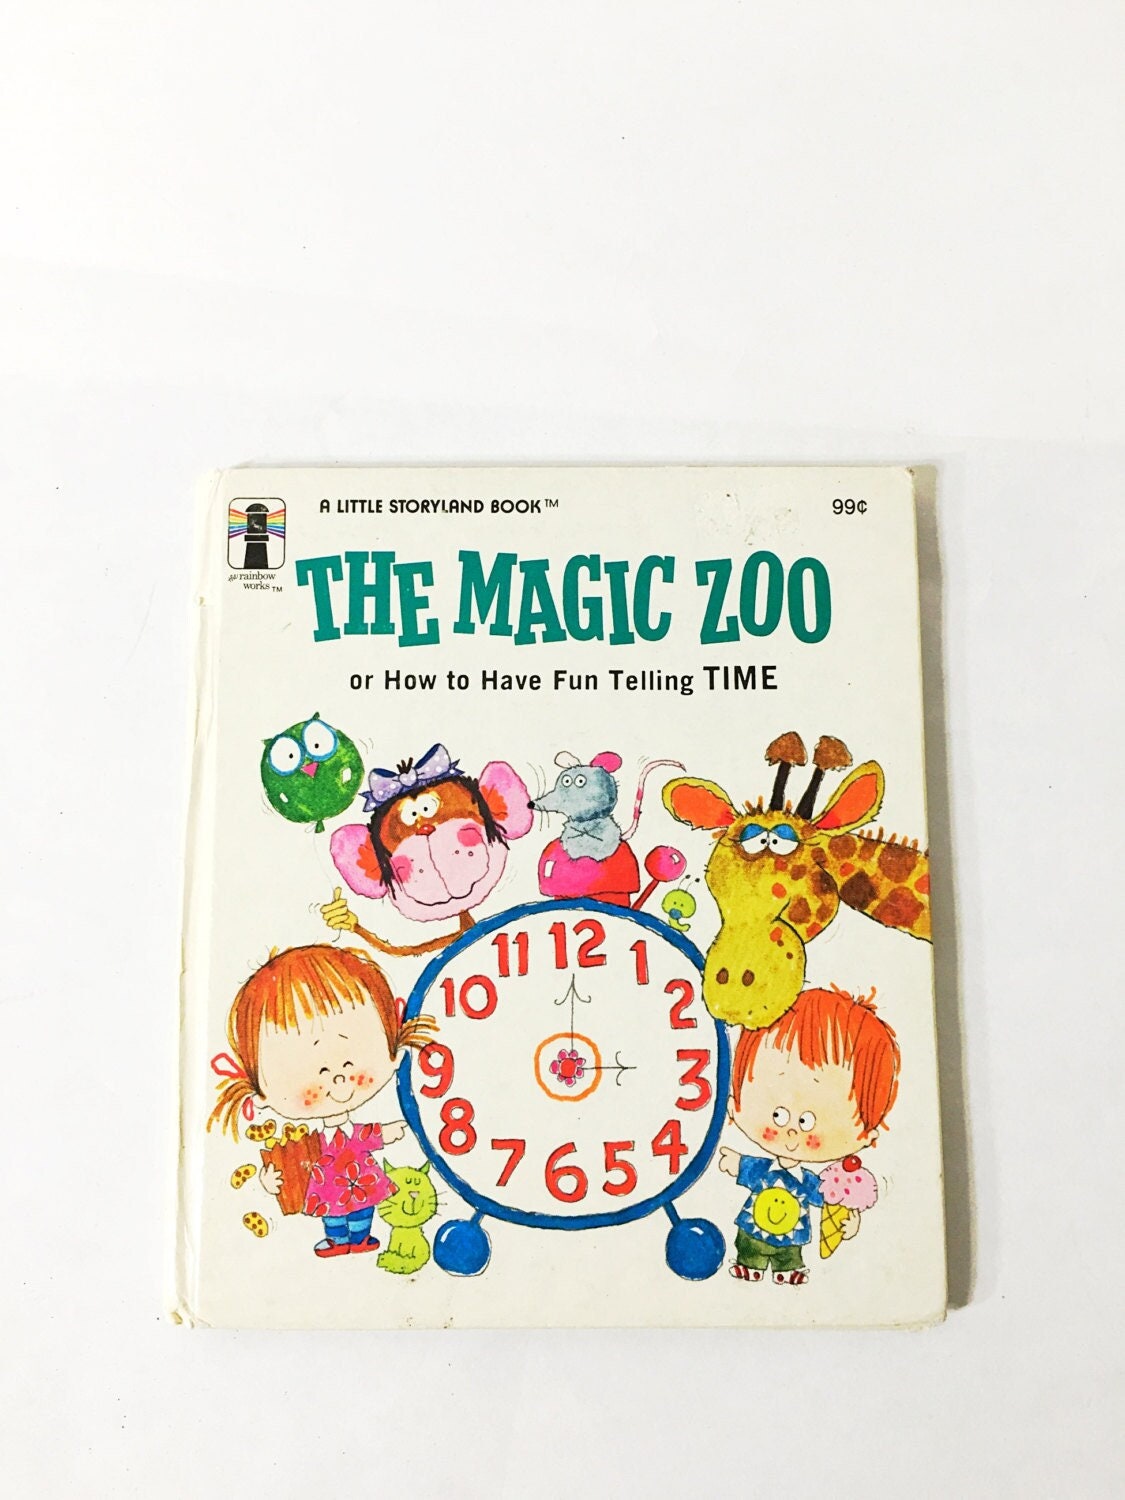 The Magic Zoo. Vintage hardback book by Patricia Mowers. How to Have Fun Telling Time. Little Storyland Books. Children's